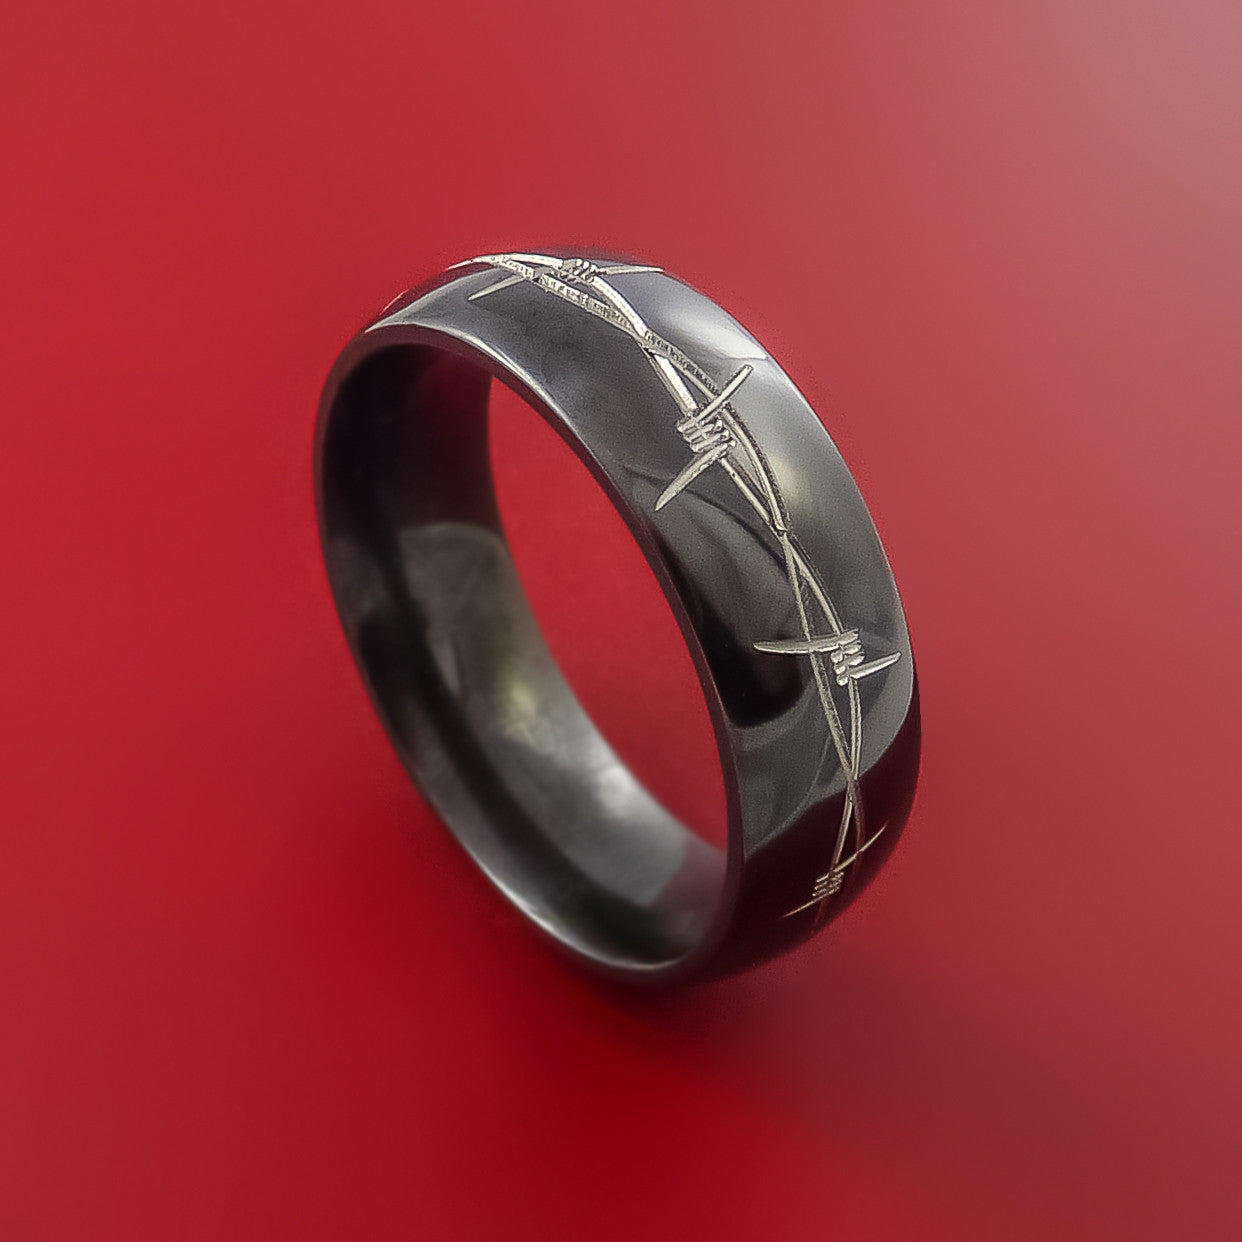 Black Zirconium Ring with Barb Wire Laser-Etched Design Inlay